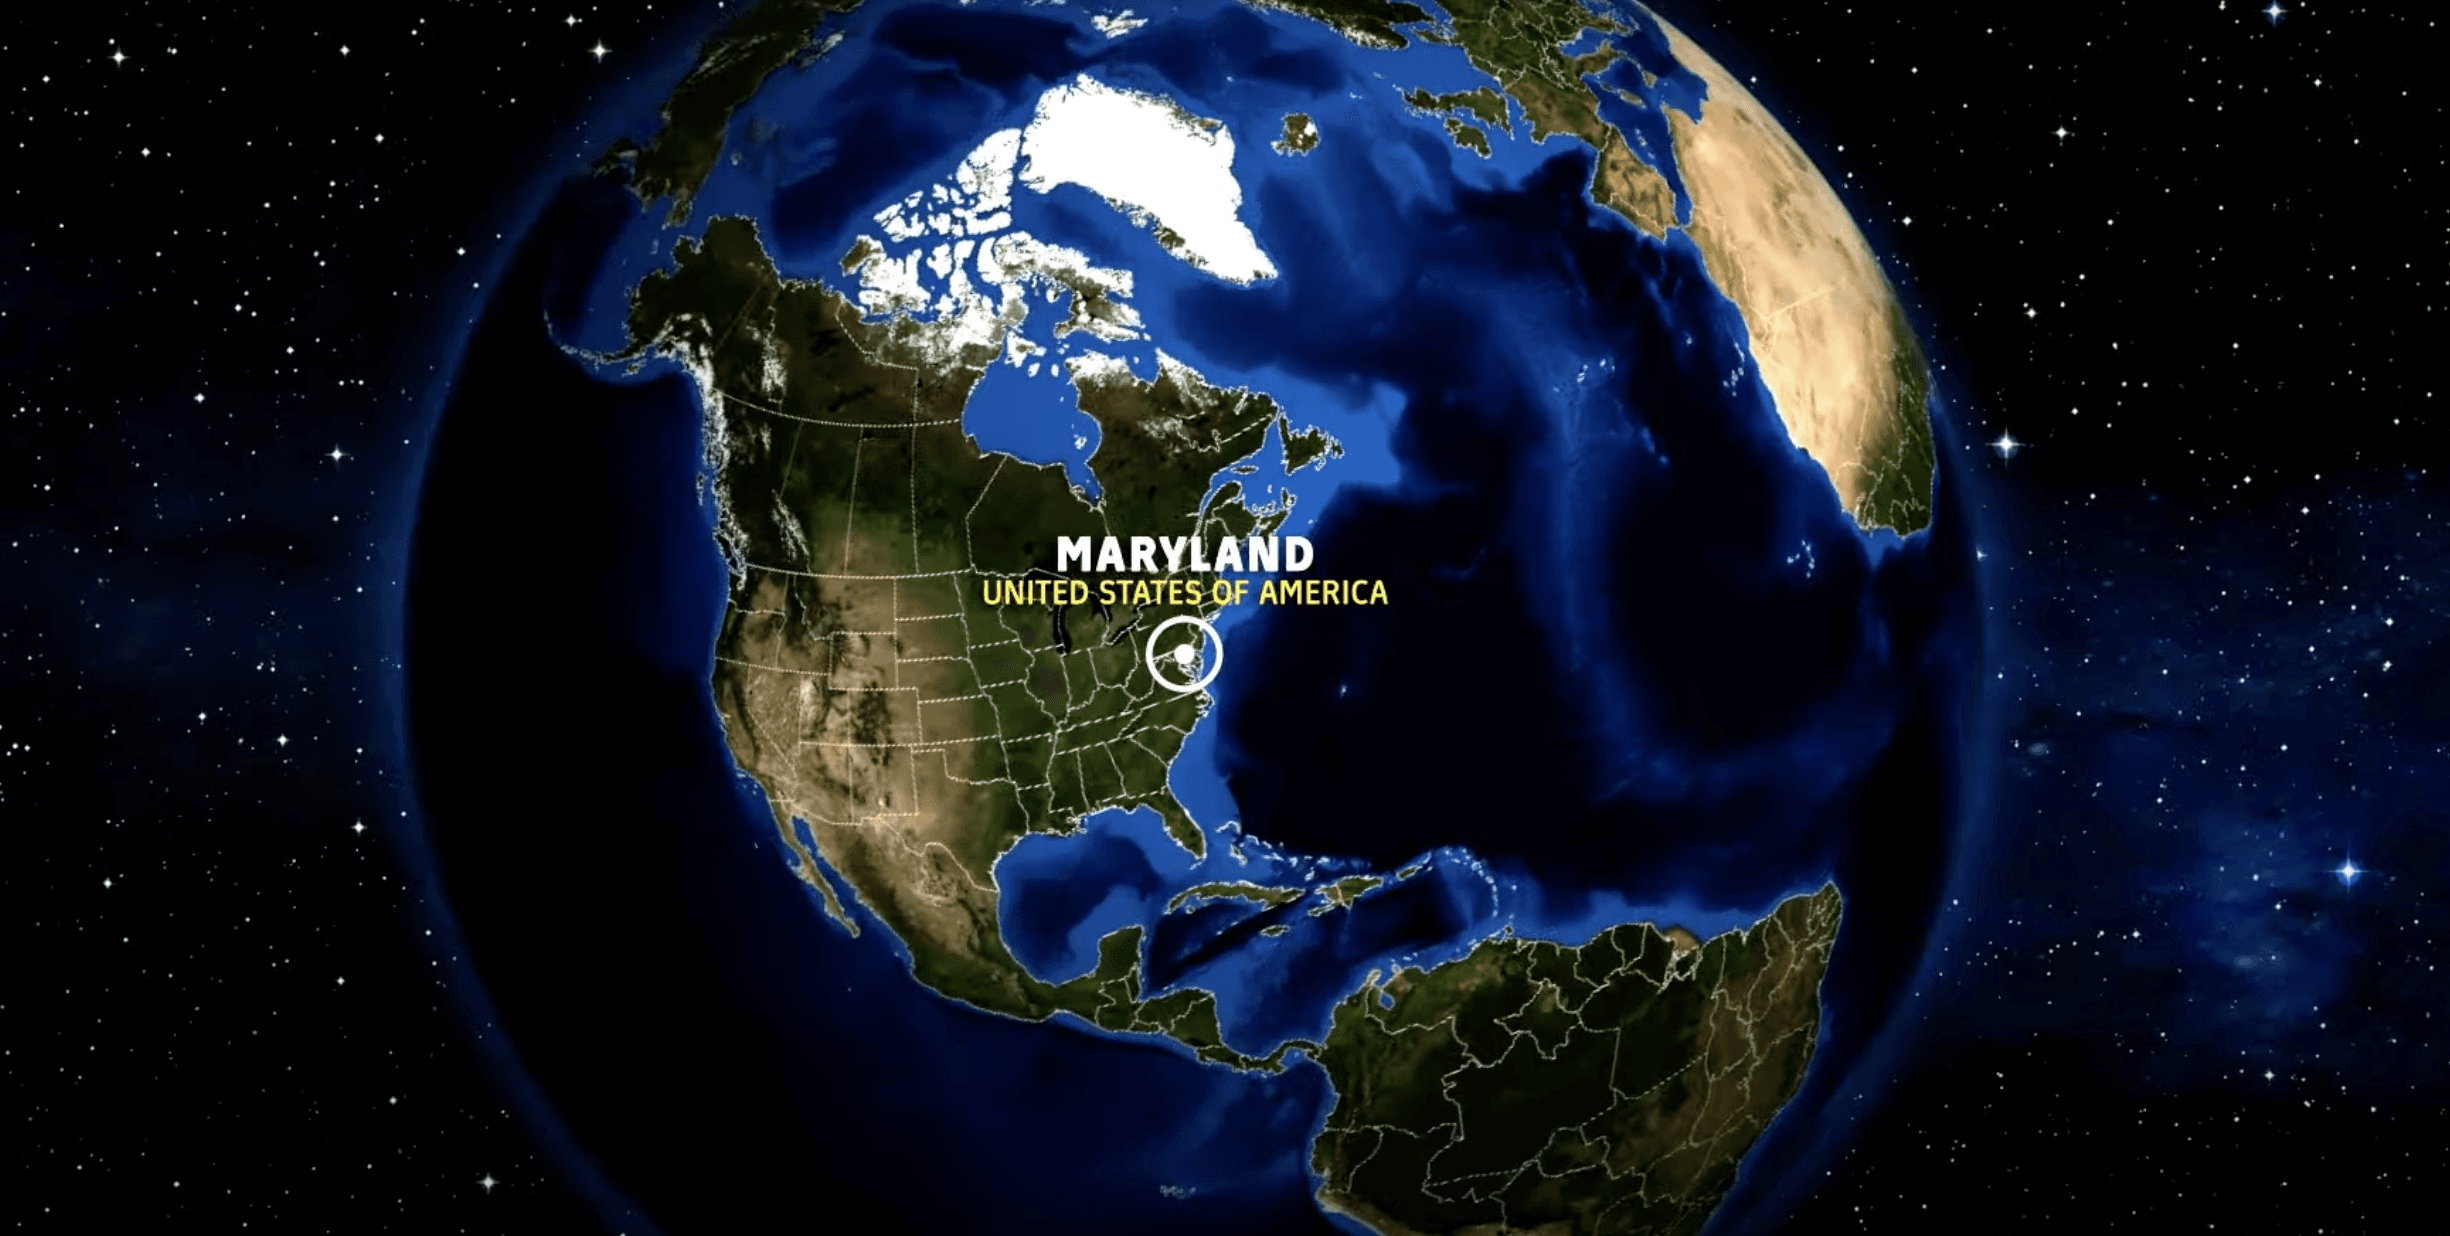 View of Earth with focus point on Maryland